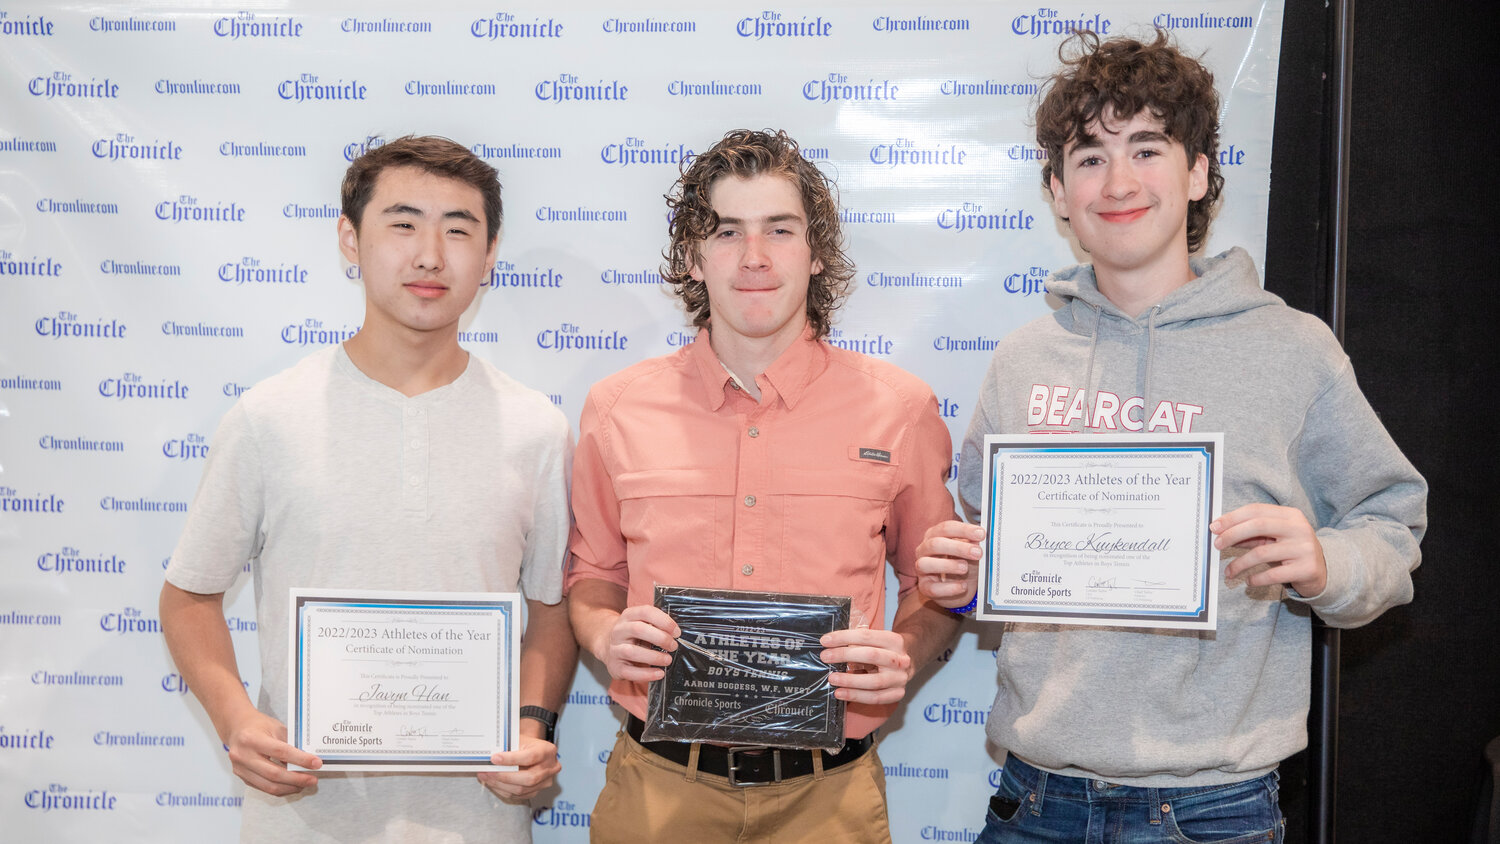 From left, Bearcat tennis standouts Javyn Han, Aaron Boggess and Bryce Kuykendall smile for a photo Tuesday evening during the “Athletes of the Year” banquet at the Jester Auto Museum.